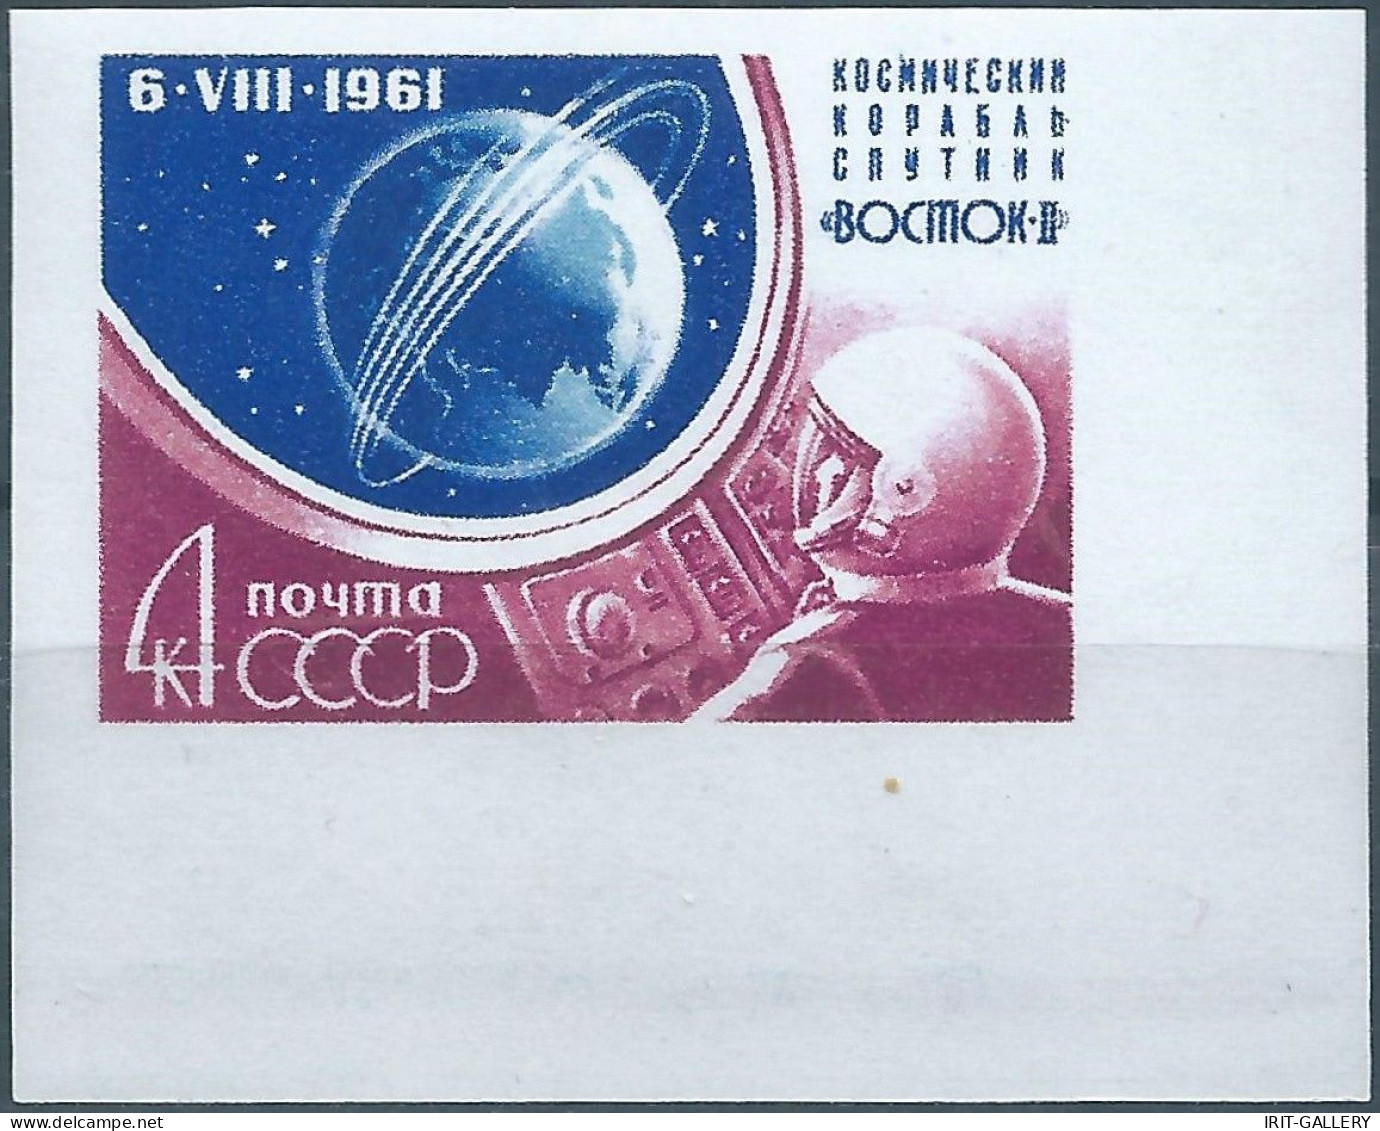 Russia-Union Of Soviet-CCCP,1961 The Second Manned Space Flight,IMPERF,Mint - Russie & URSS